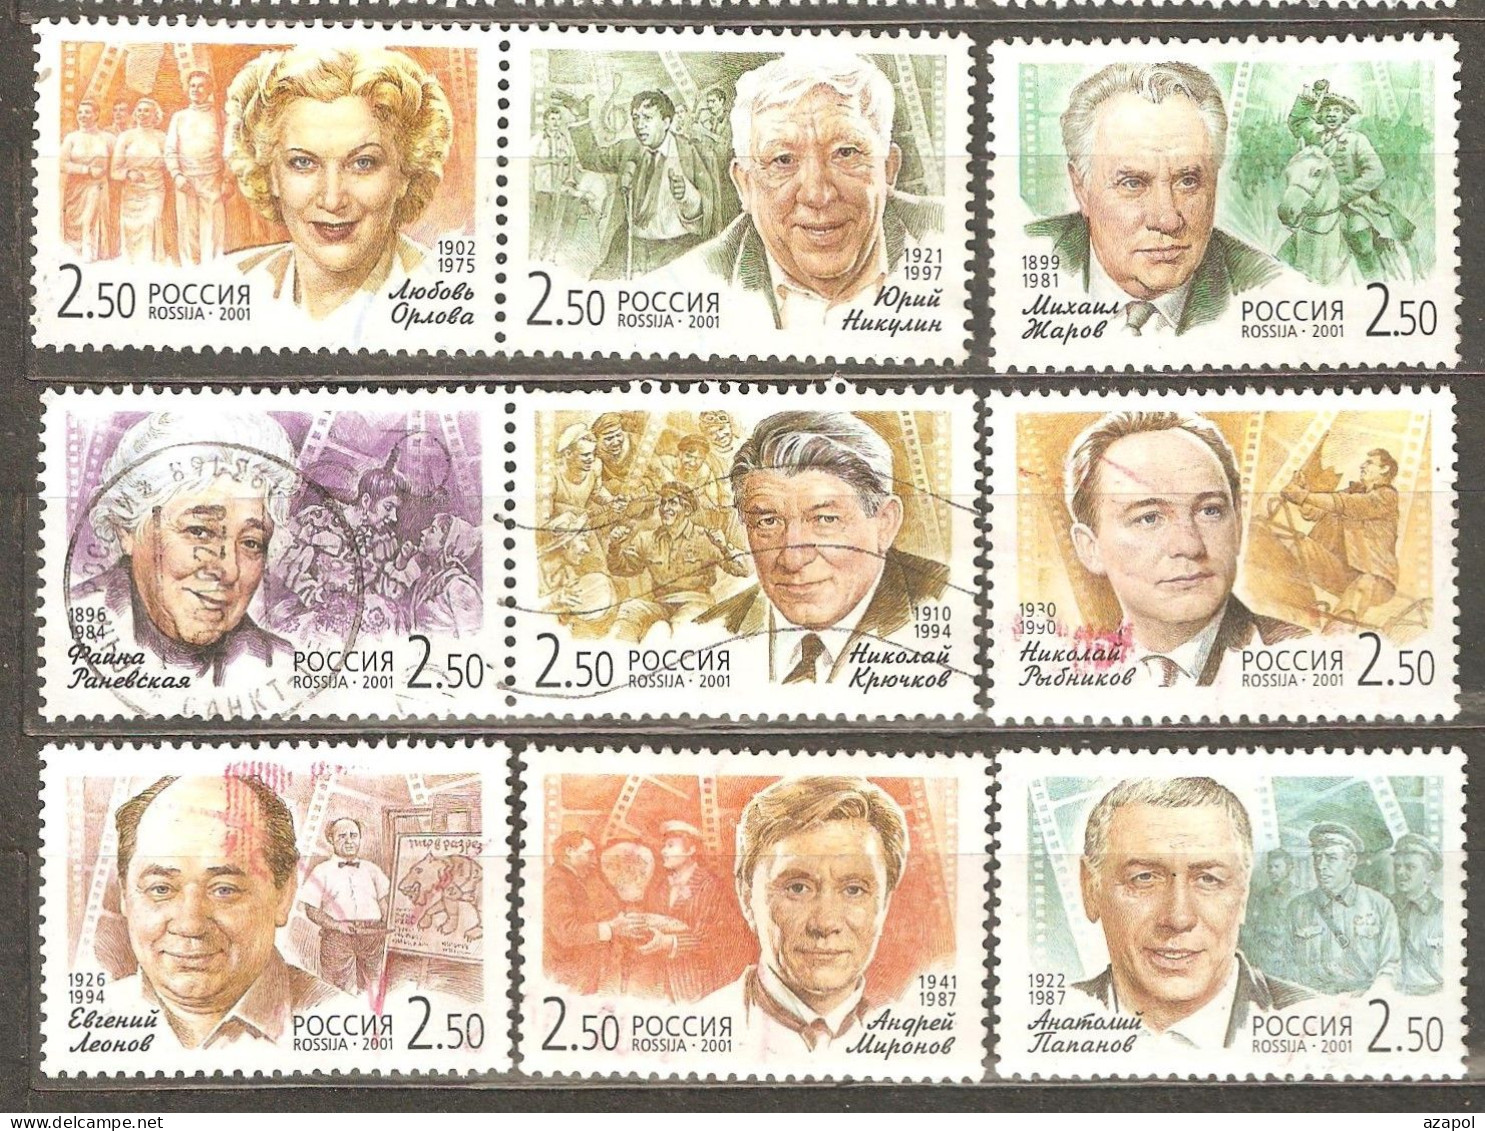 Russia: Full Set Of 9 Used Stamps, Popular Film Actors Of Russian Cinema Art, 2001, Mi#933-41 - Used Stamps